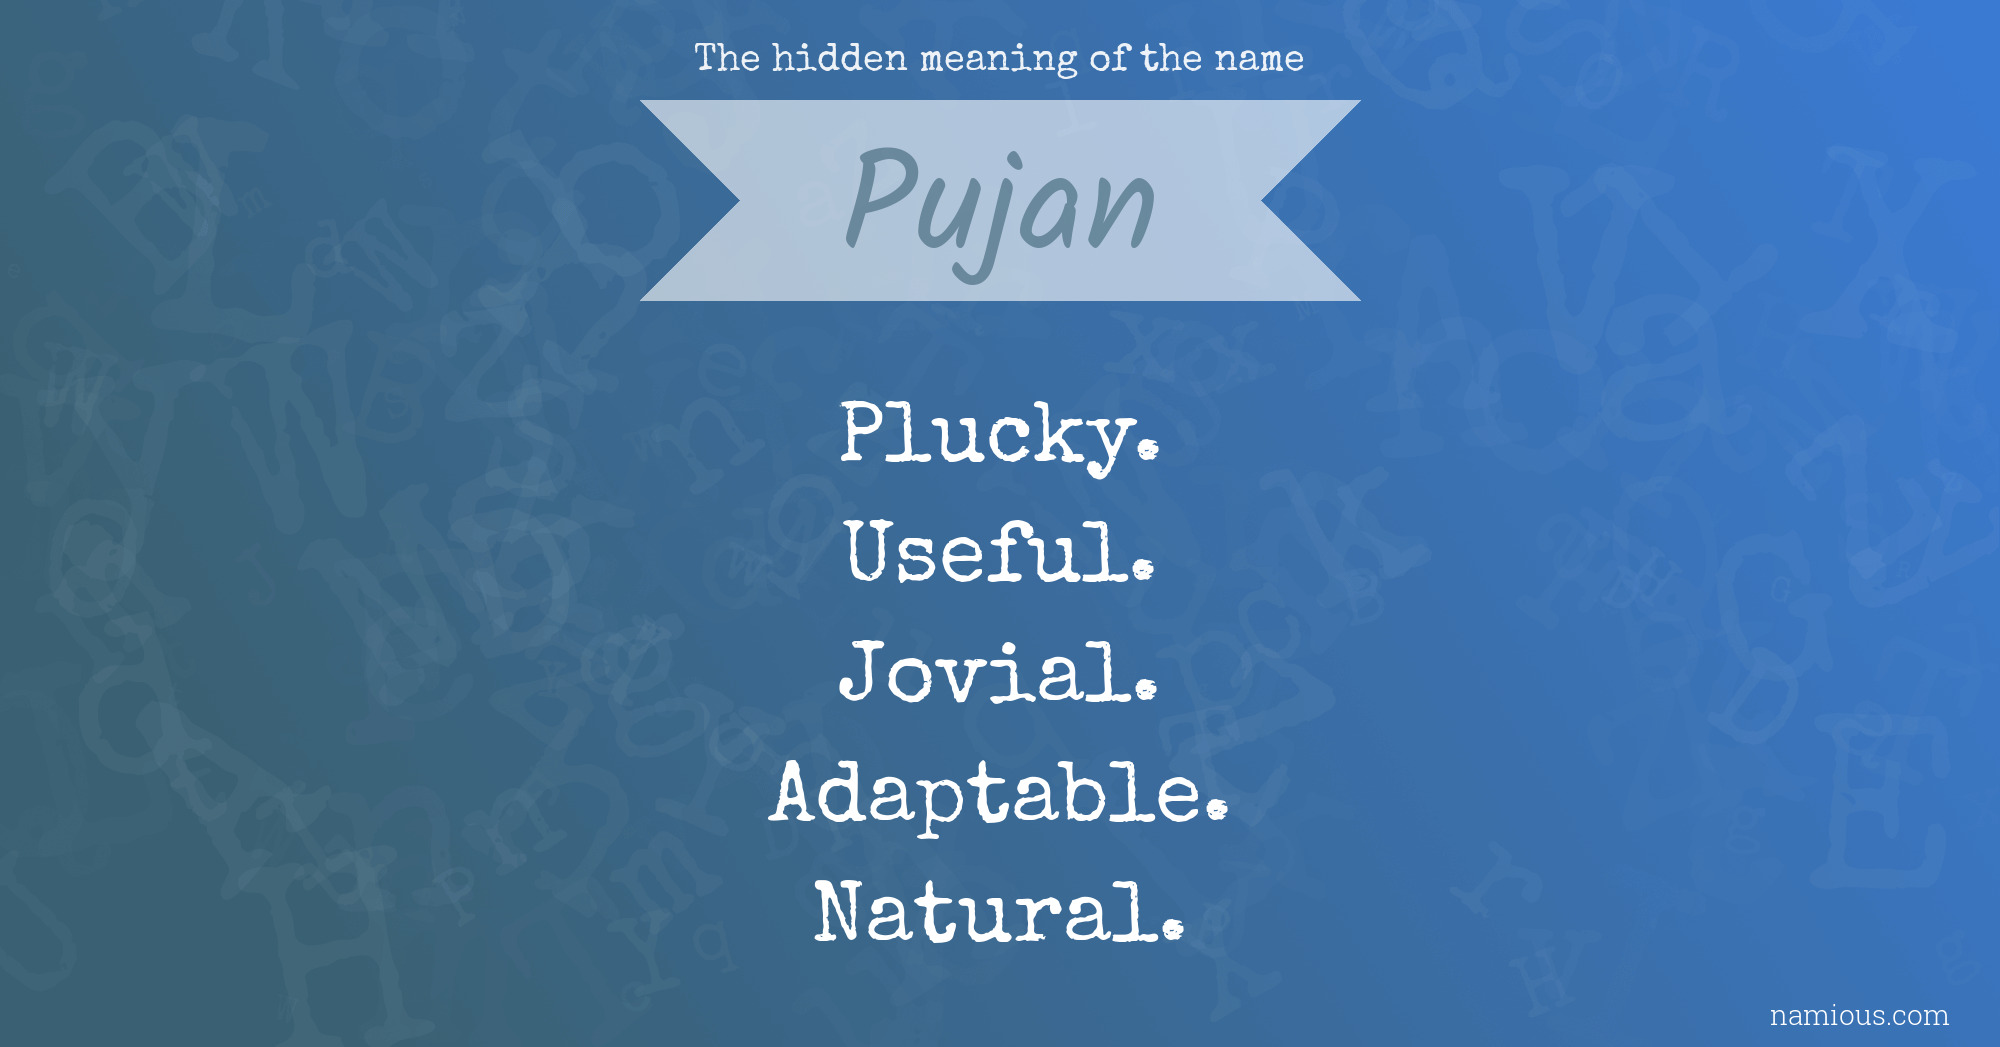 The hidden meaning of the name Pujan